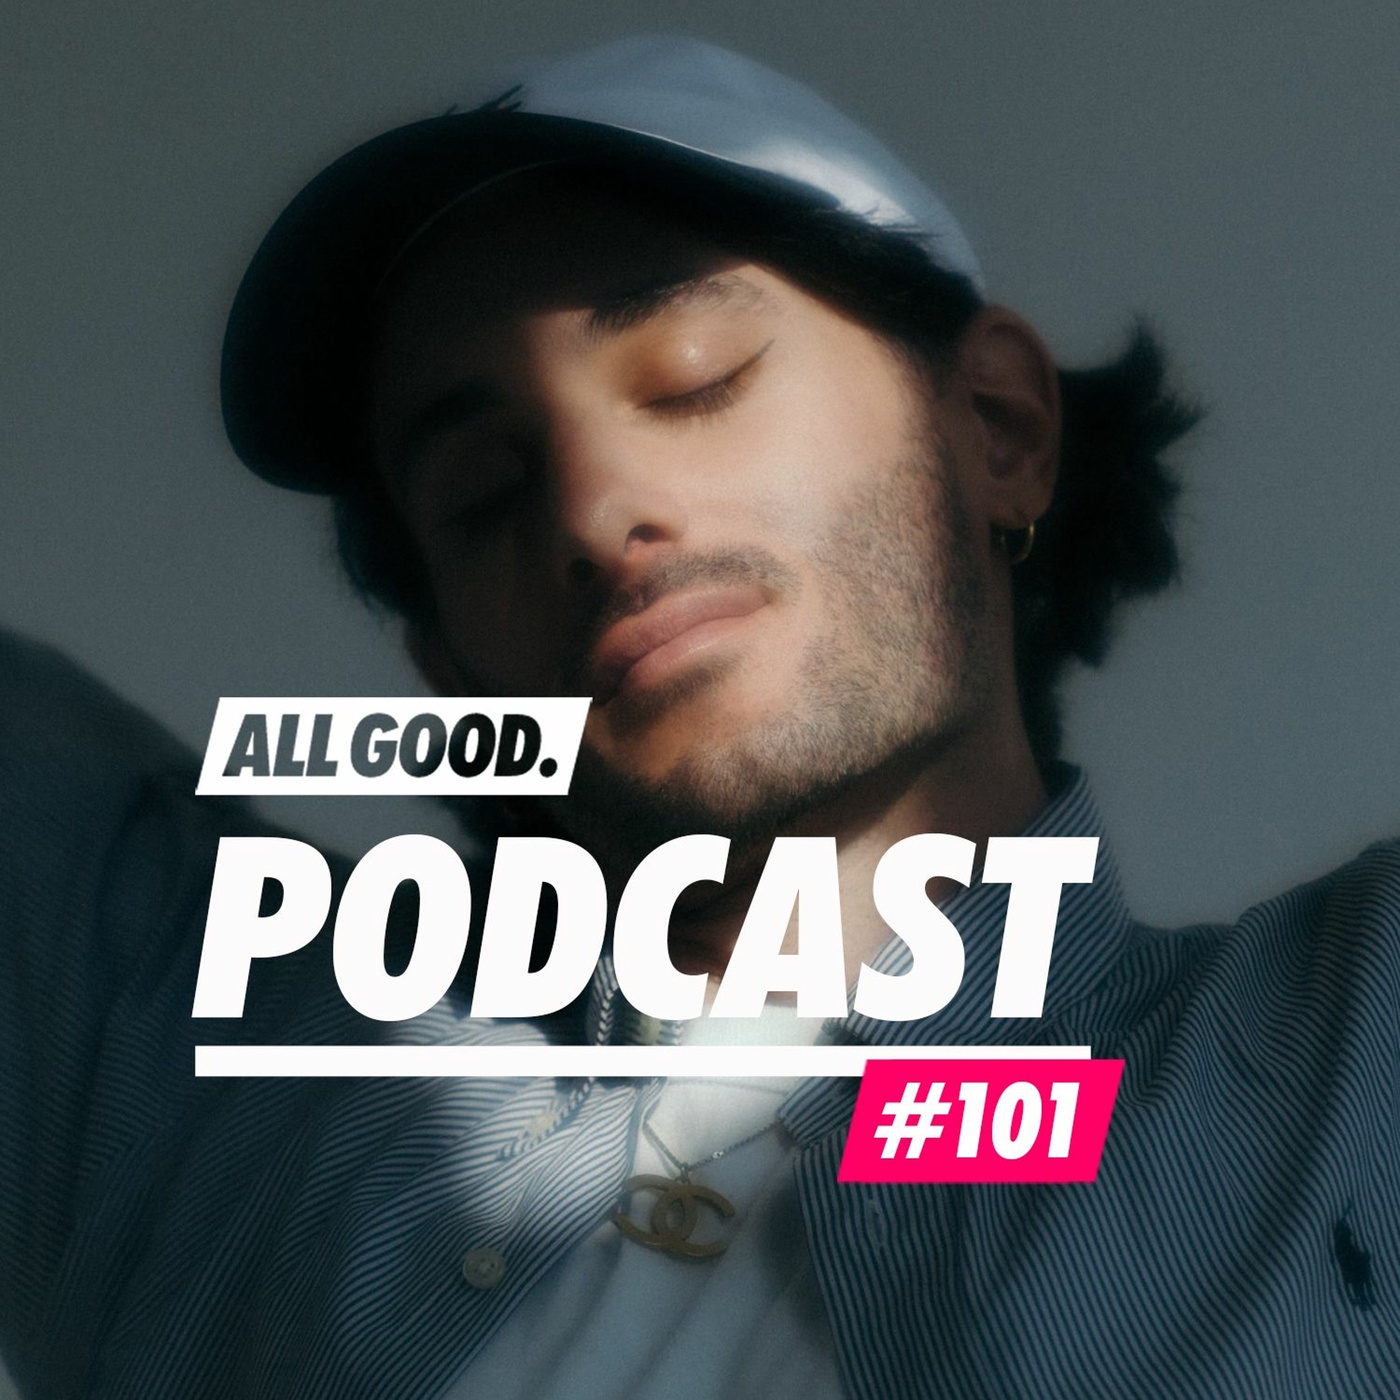 ALL GOOD PODCAST #101: Search Yiu